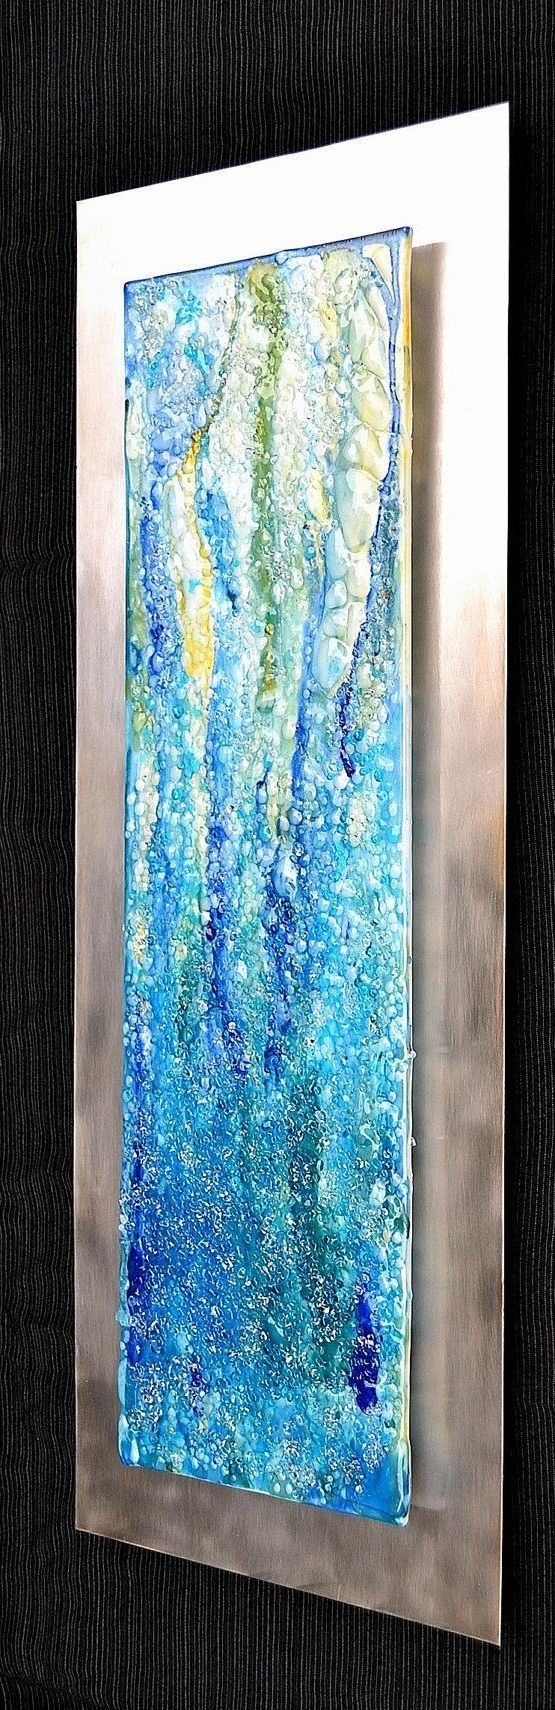 Preferred Waterfall – Modern Fused Glass Wall Hanging Art On Stainless Steel In Fused Glass Fish Wall Art (View 5 of 15)